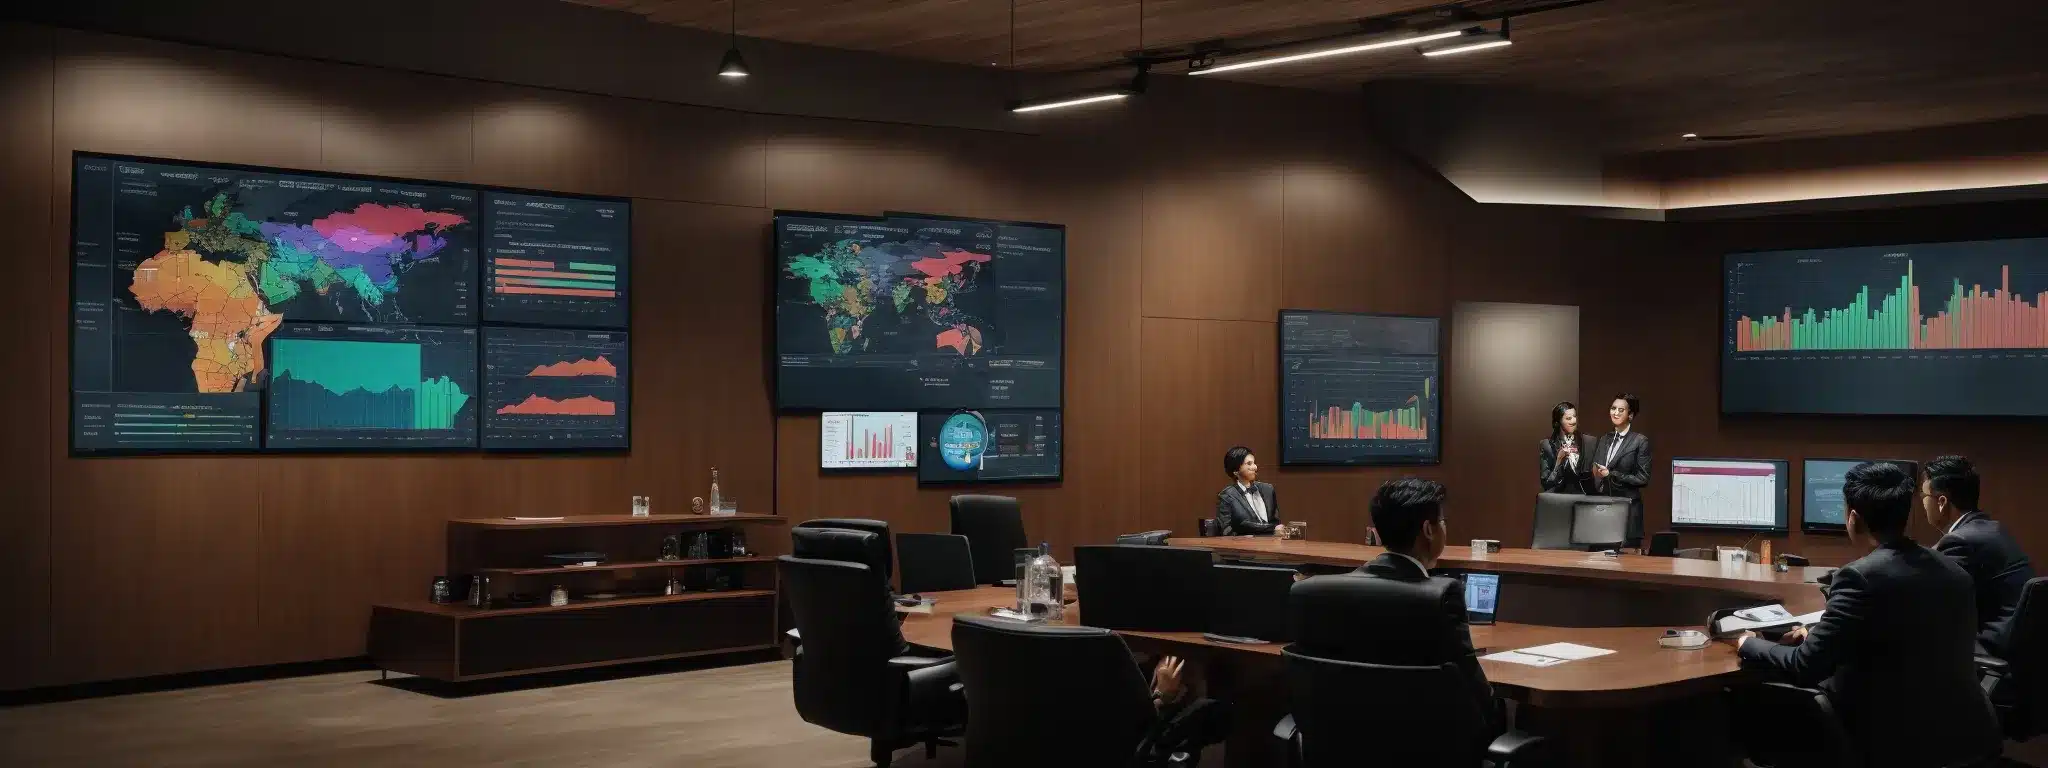 A Strategic Meeting Room With A Large Monitor Displaying Colorful Graphs And Social Media Statistics, Where Marketing Professionals Are Actively Engaged In Discussion.